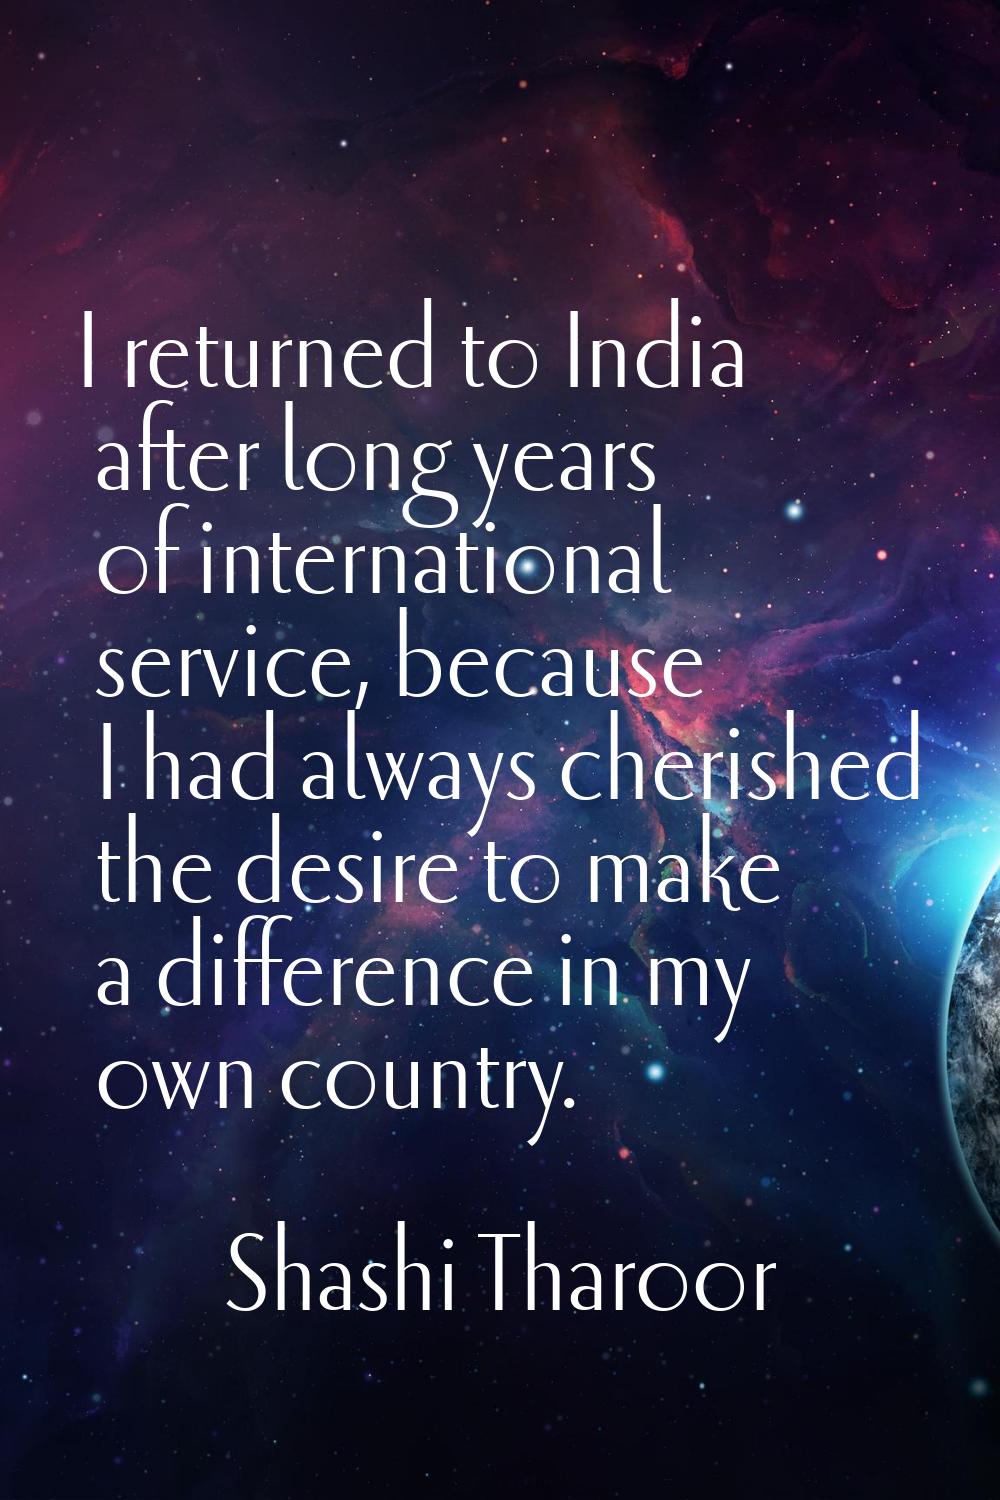 I returned to India after long years of international service, because I had always cherished the d